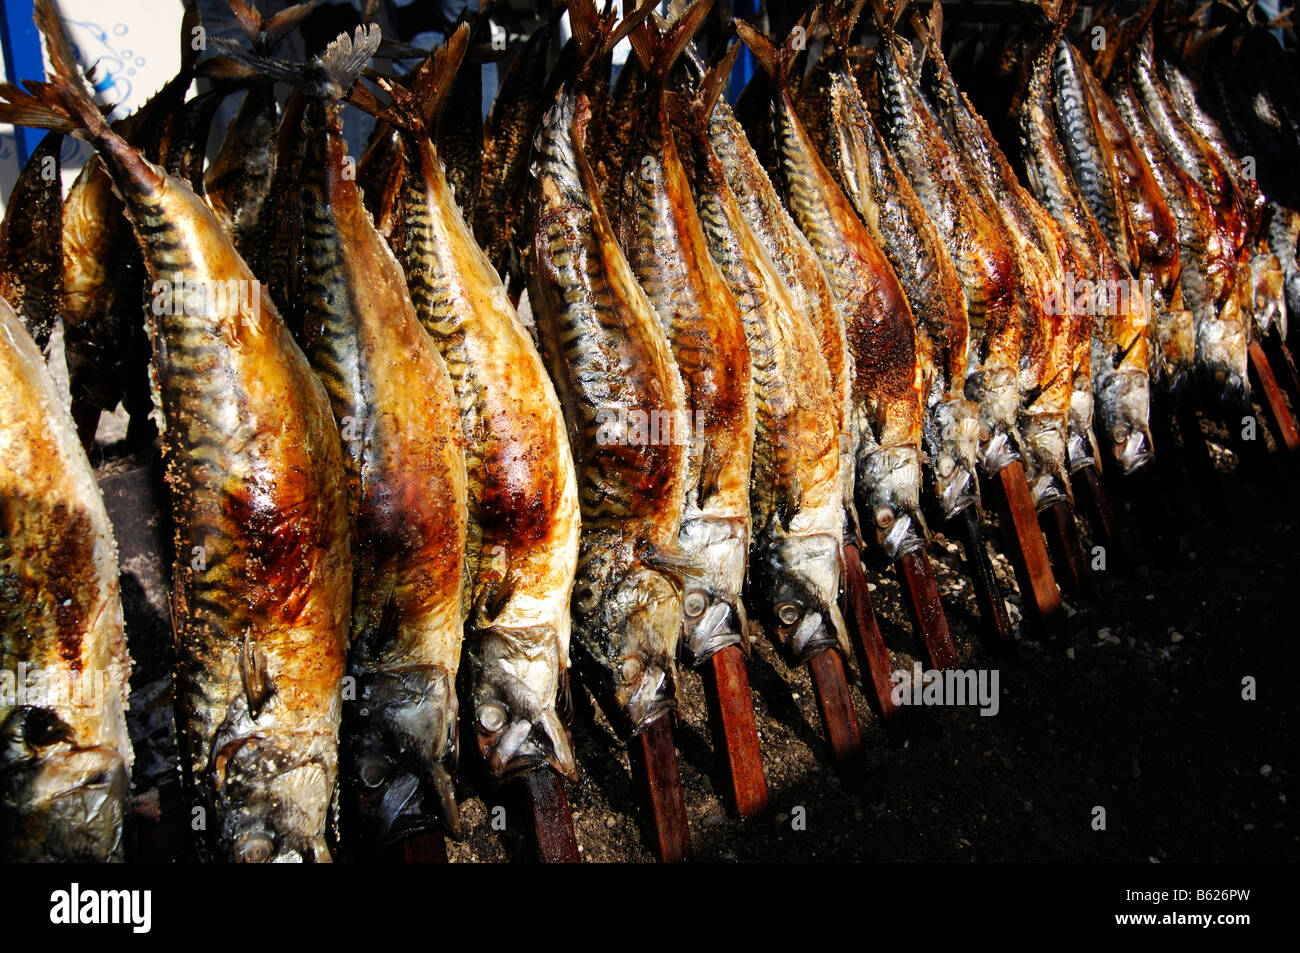 Staked fish in front of Fischer Vroni, Wies'n, Oktoberfest, Munich, Bavaria, Germany, Europe Stock Photo